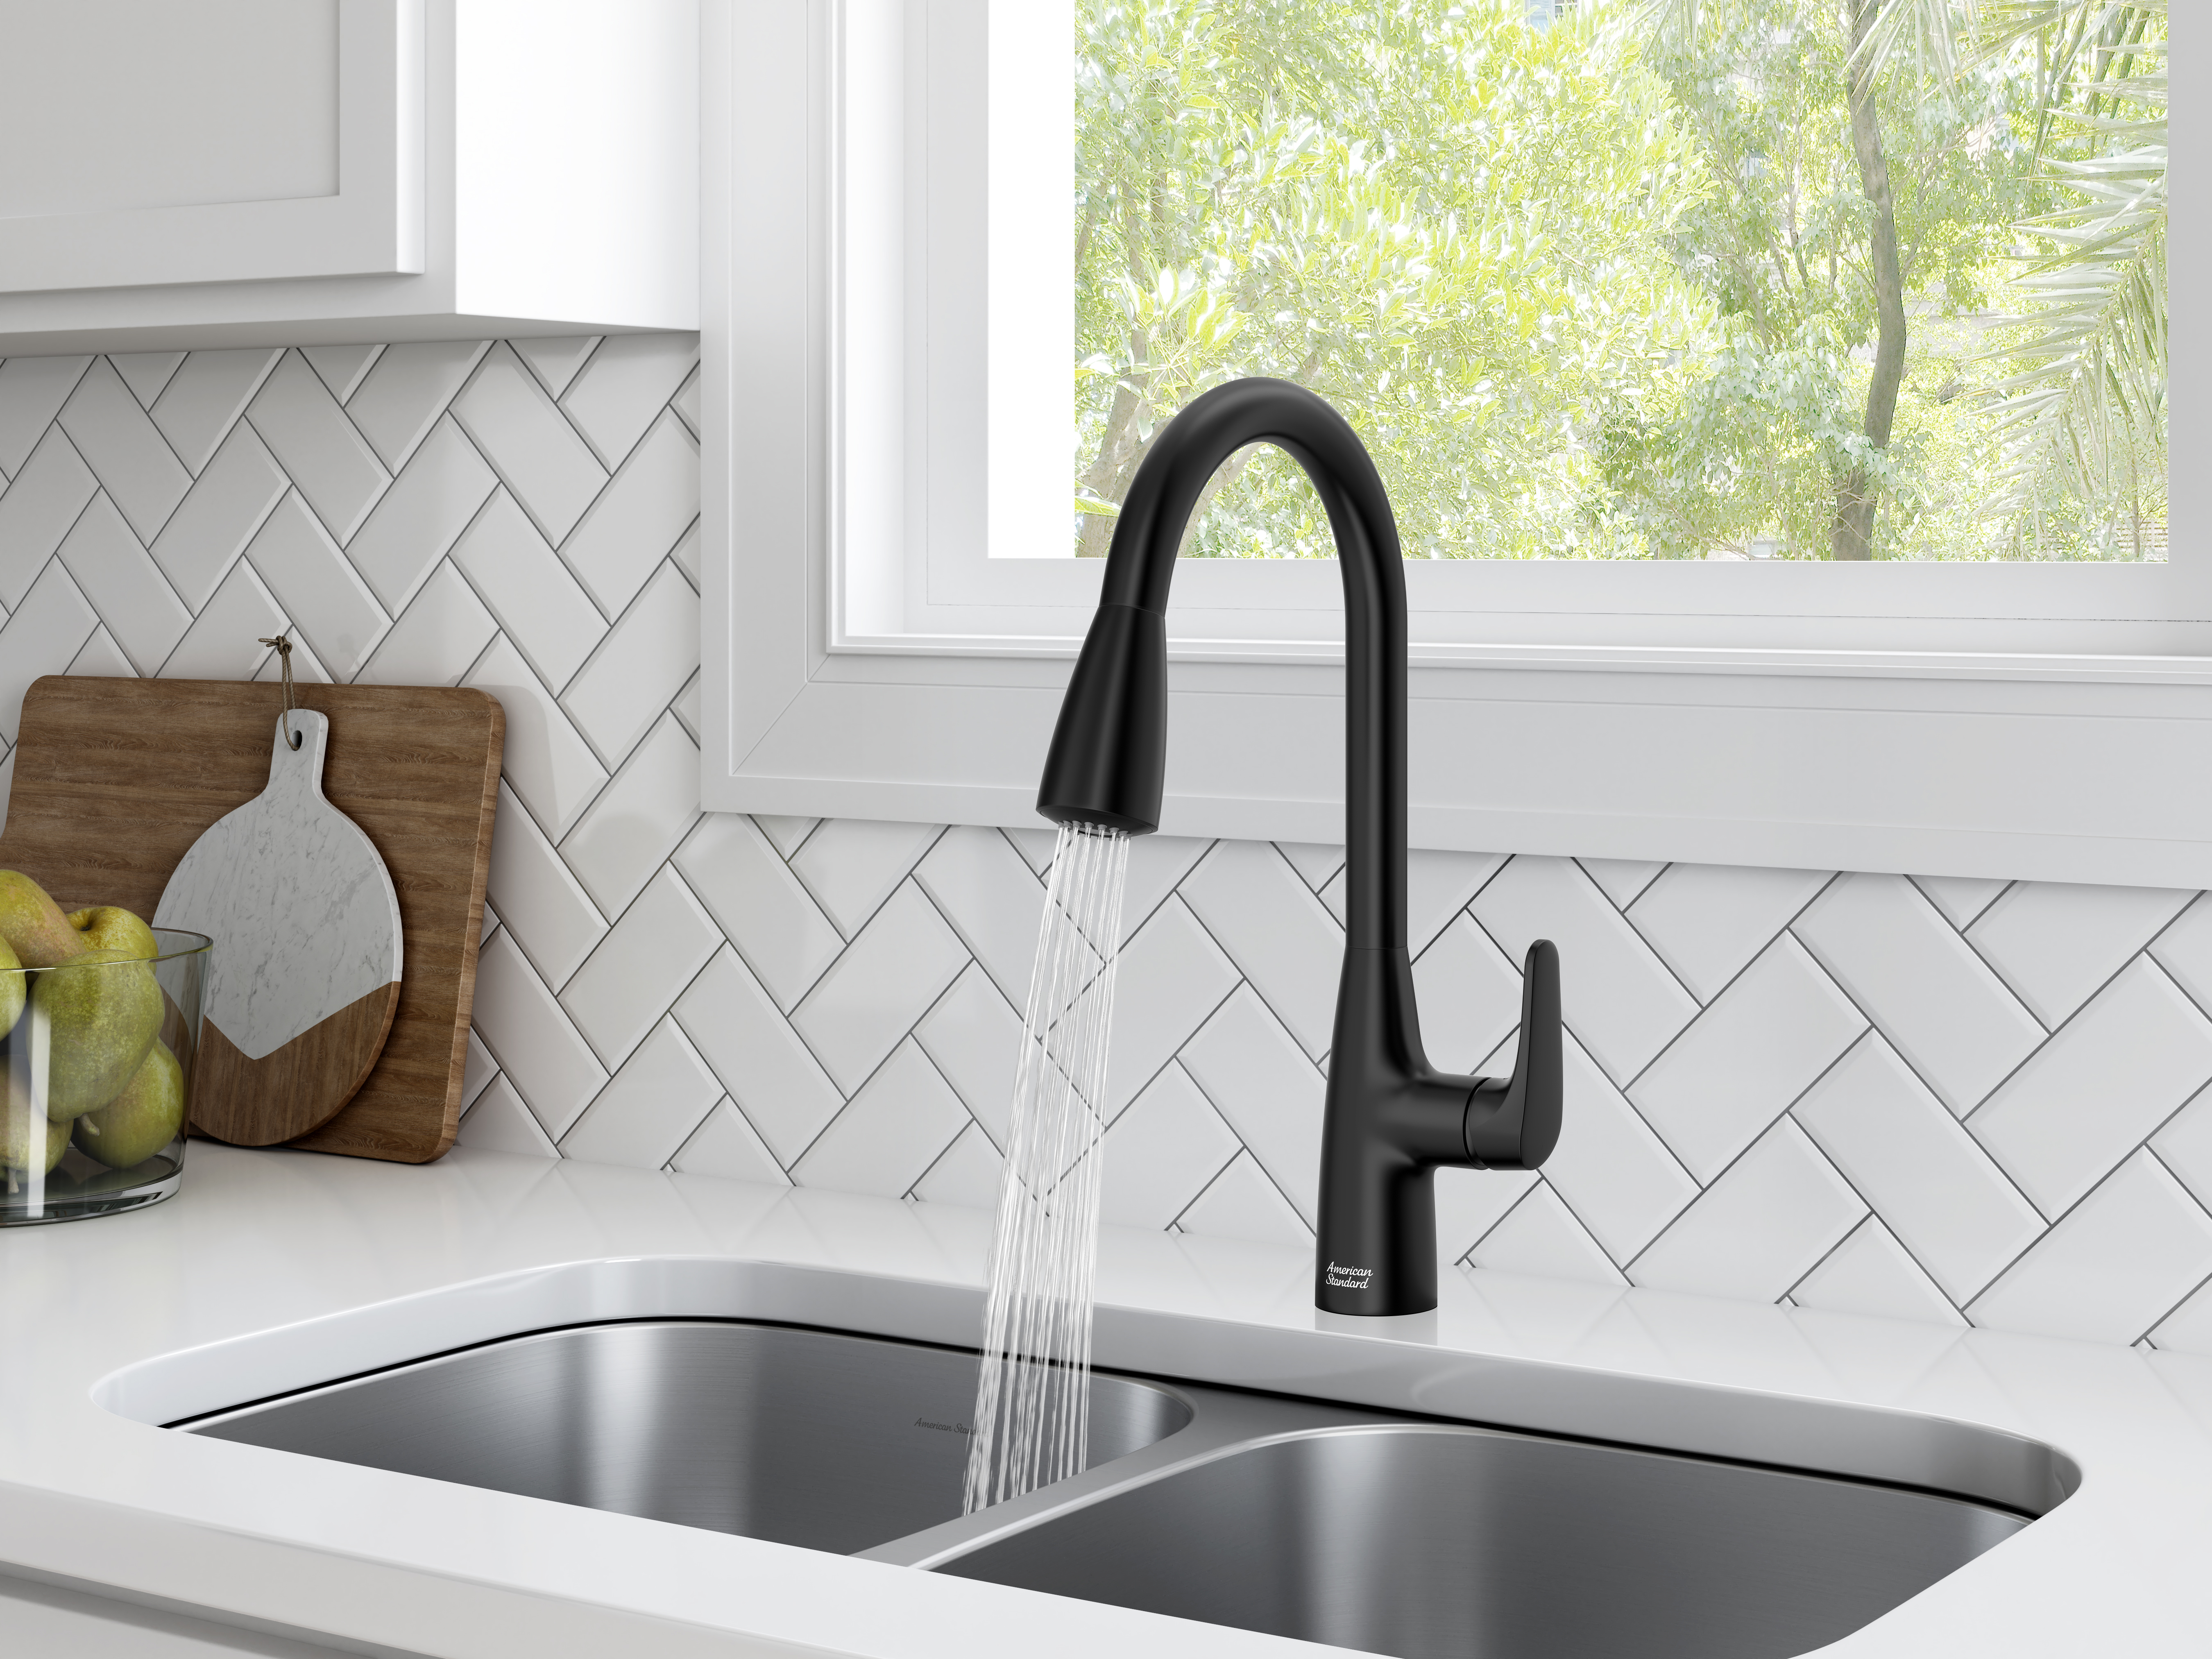 Colony™ PRO Single-Handle Pull-Down Dual Spray Kitchen Faucet 1.5 gpm/5.7 L/min